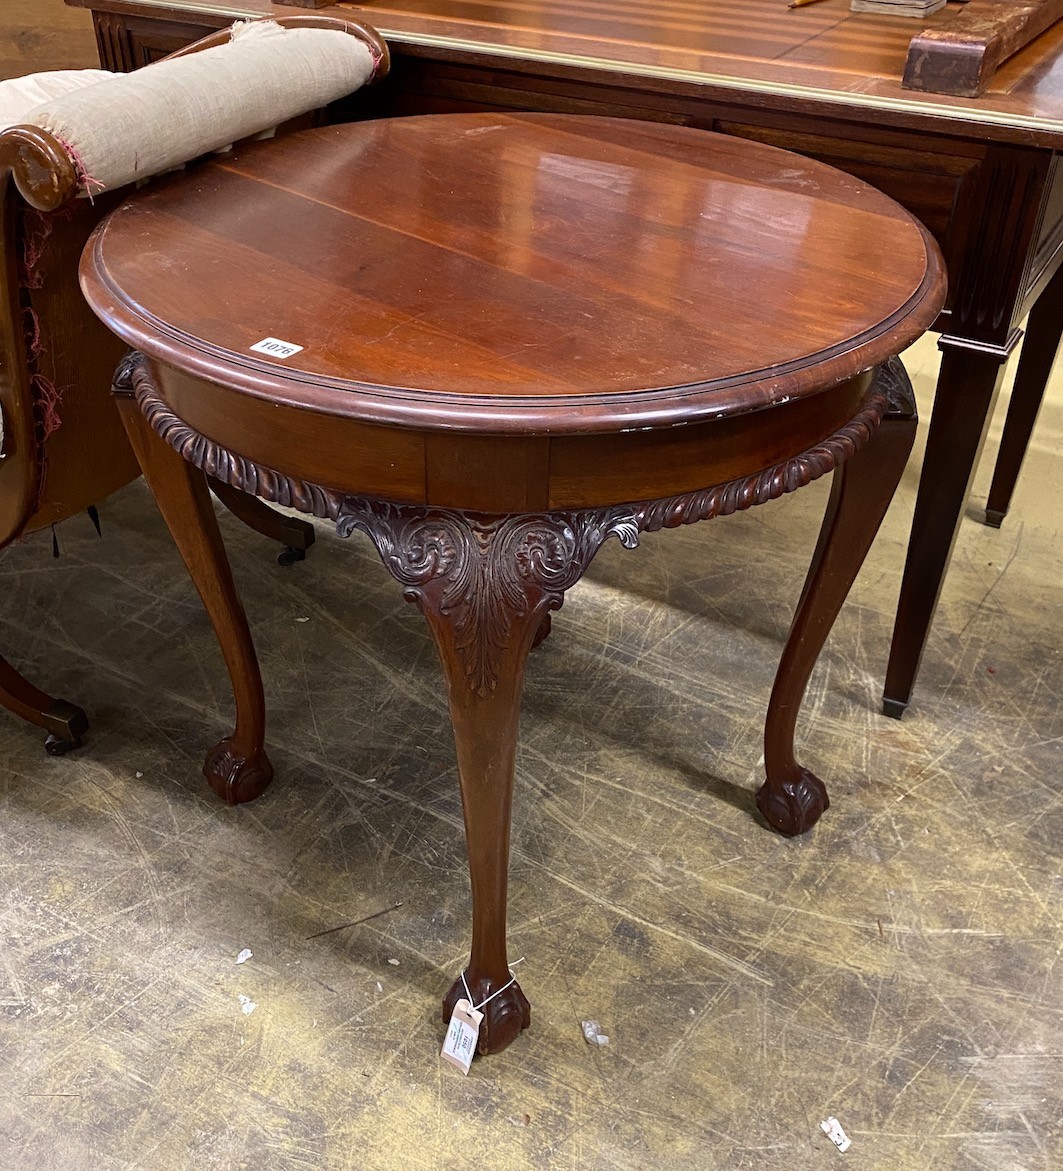 An early 20th century Chippendale revival circular mahogany centre table, diameter 73cm, height 70cm